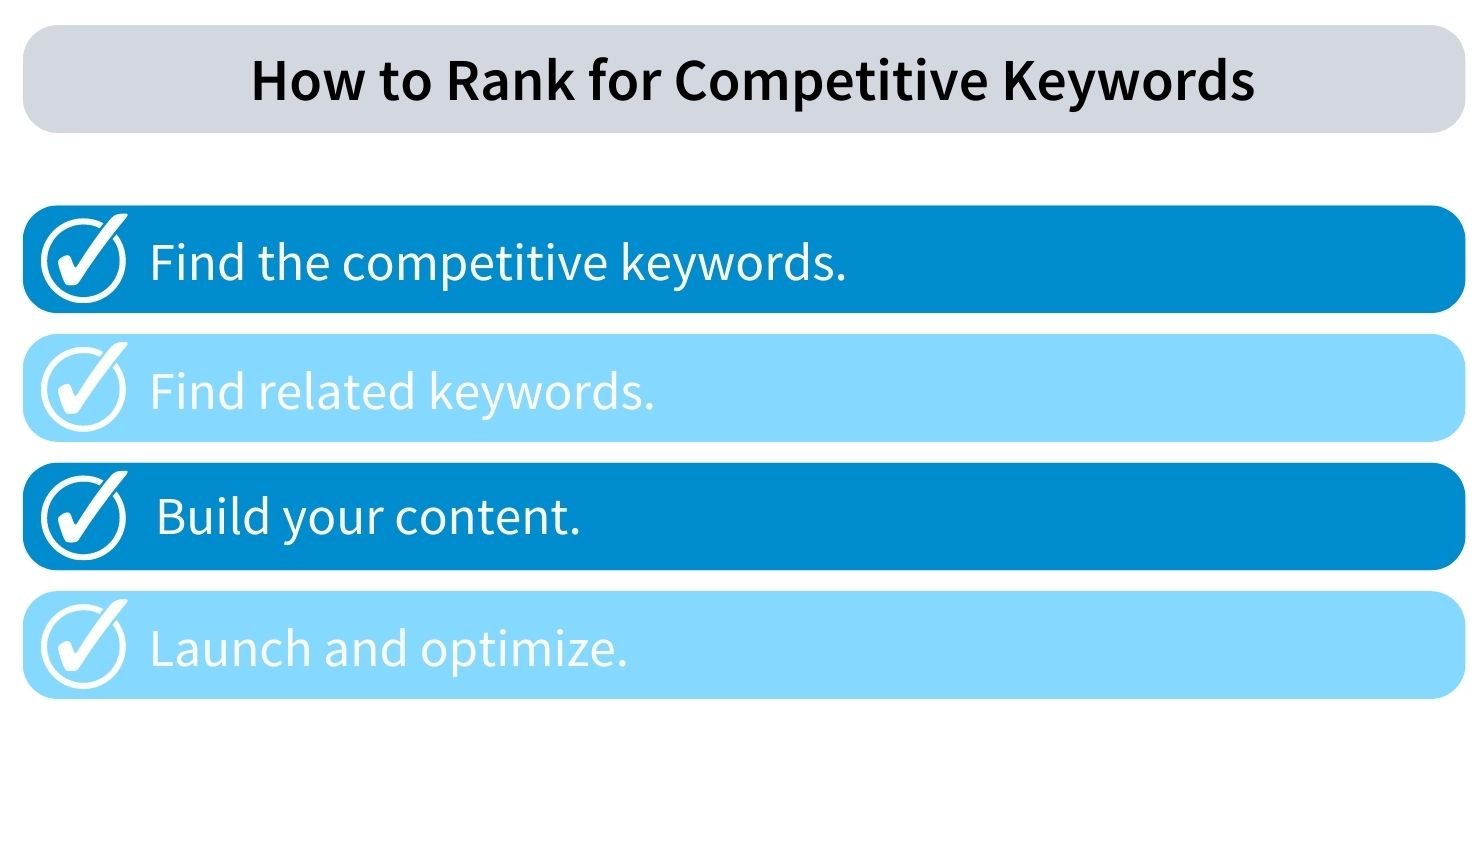 How to rank for competitive keywords